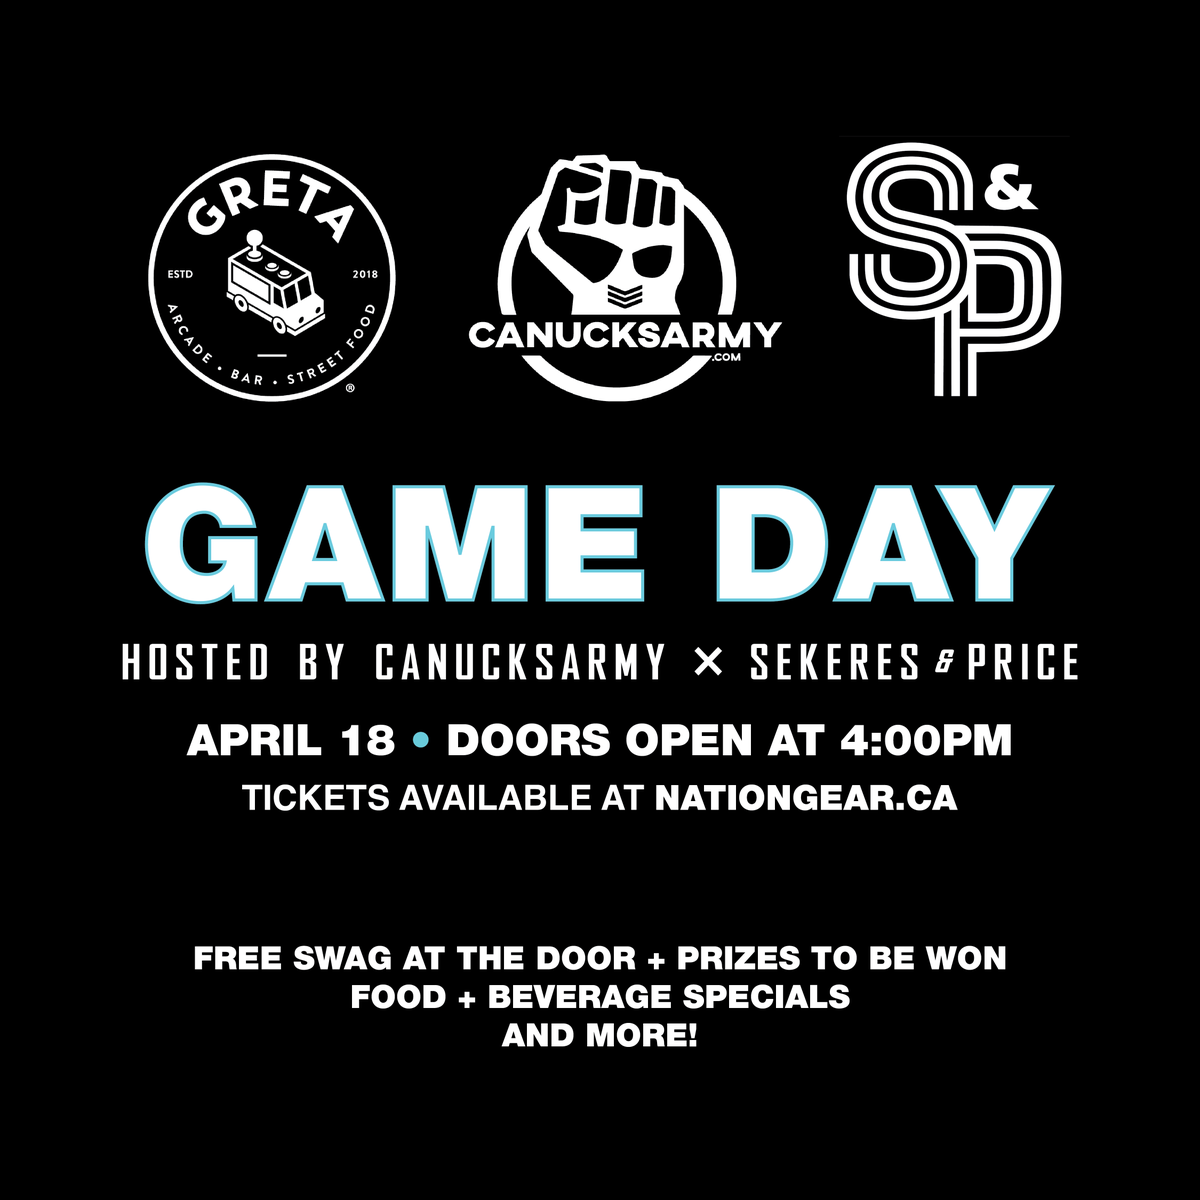 Need plans for the last game of the regular season? Look no further! Join the @CanucksArmy and @SekeresandPrice crew to watch the game, score some swag, and cheer on the boys on GAME DAY GRETA Bar YVR 🏒 Get your tickets ⬇️ bit.ly/4arjKVr #GameDayatGreta